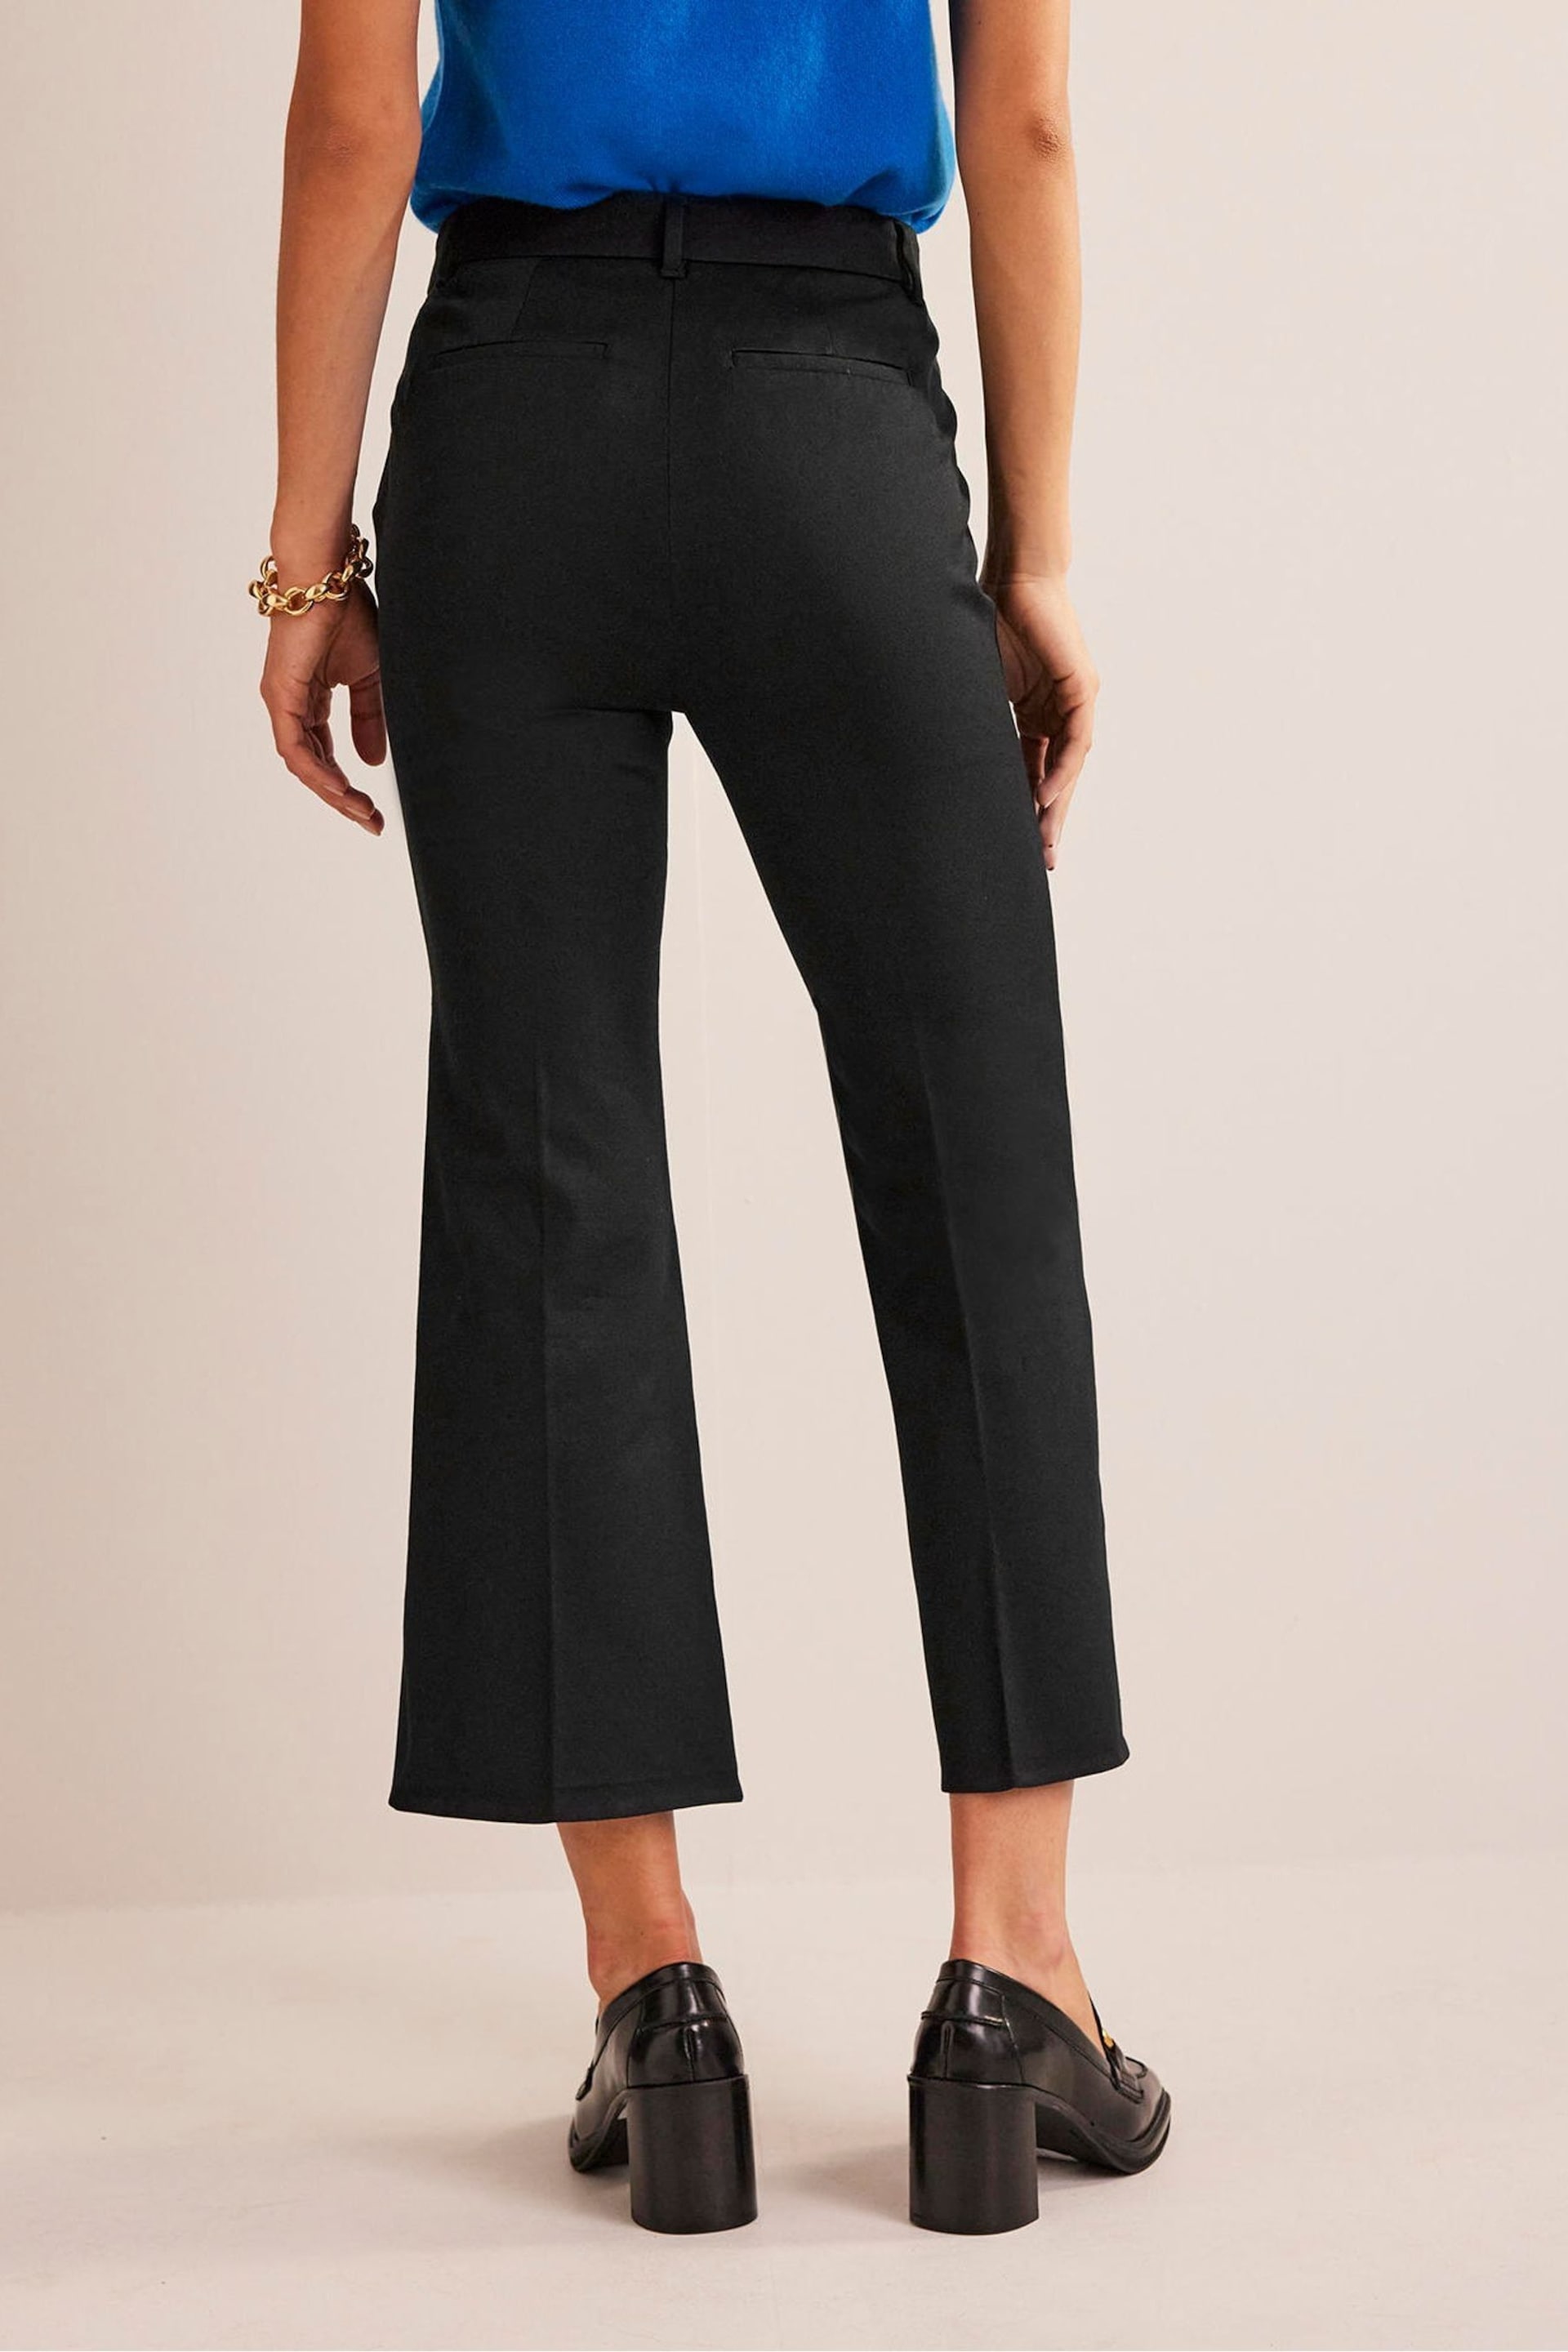 Boden Black Chelsea Bi-Stretch Trousers - Image 2 of 4